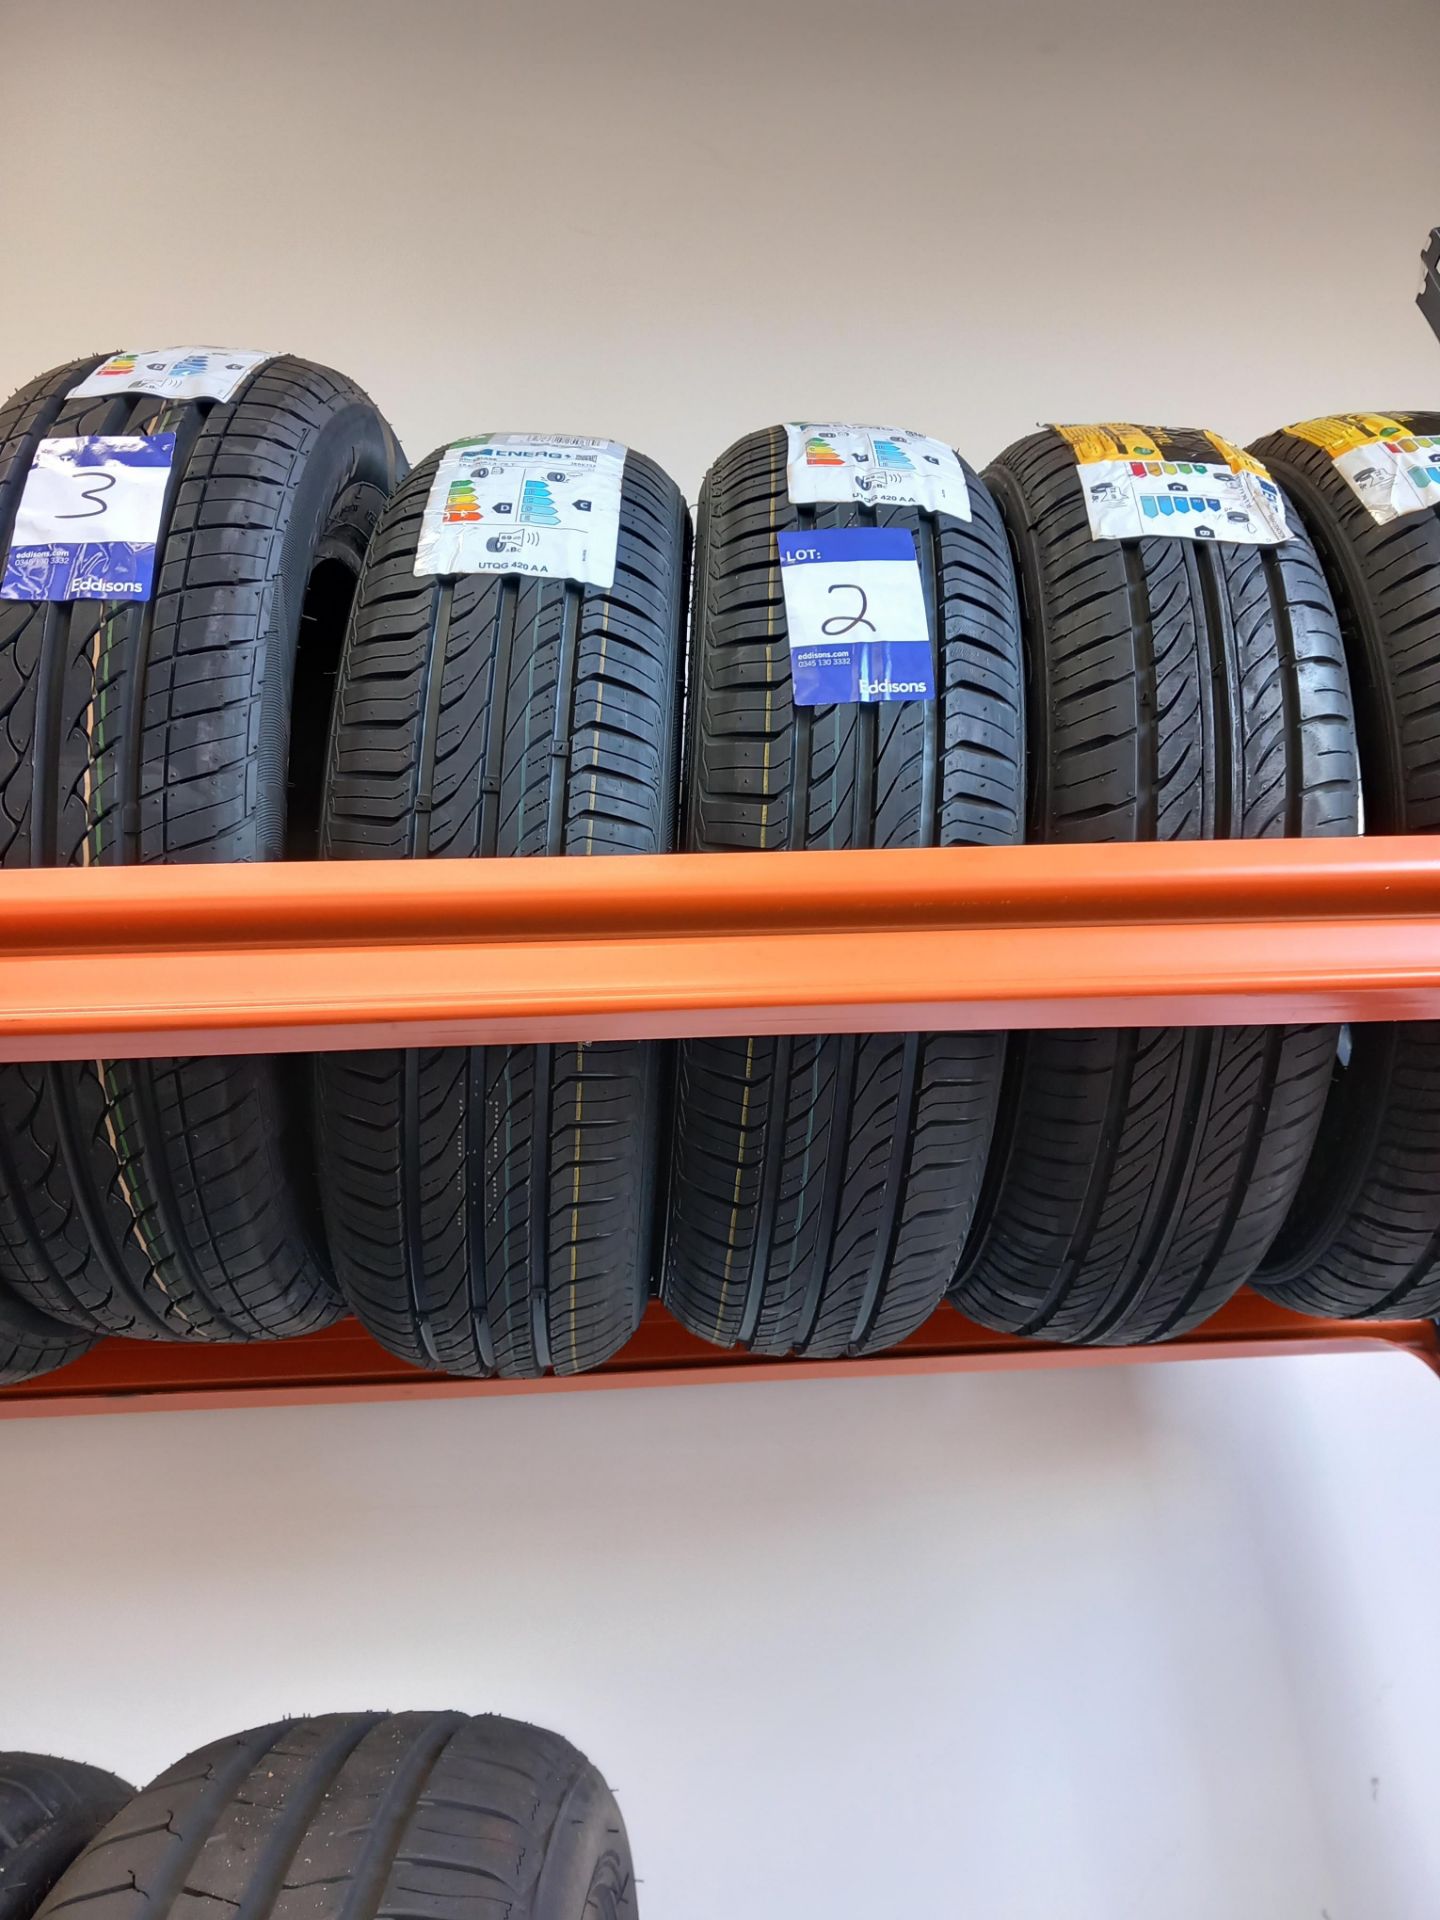 2 Rockblade 515 165/70 13 Tyres -This is a Composite lot made up of Lots 1 - 96 inclusive. At the en